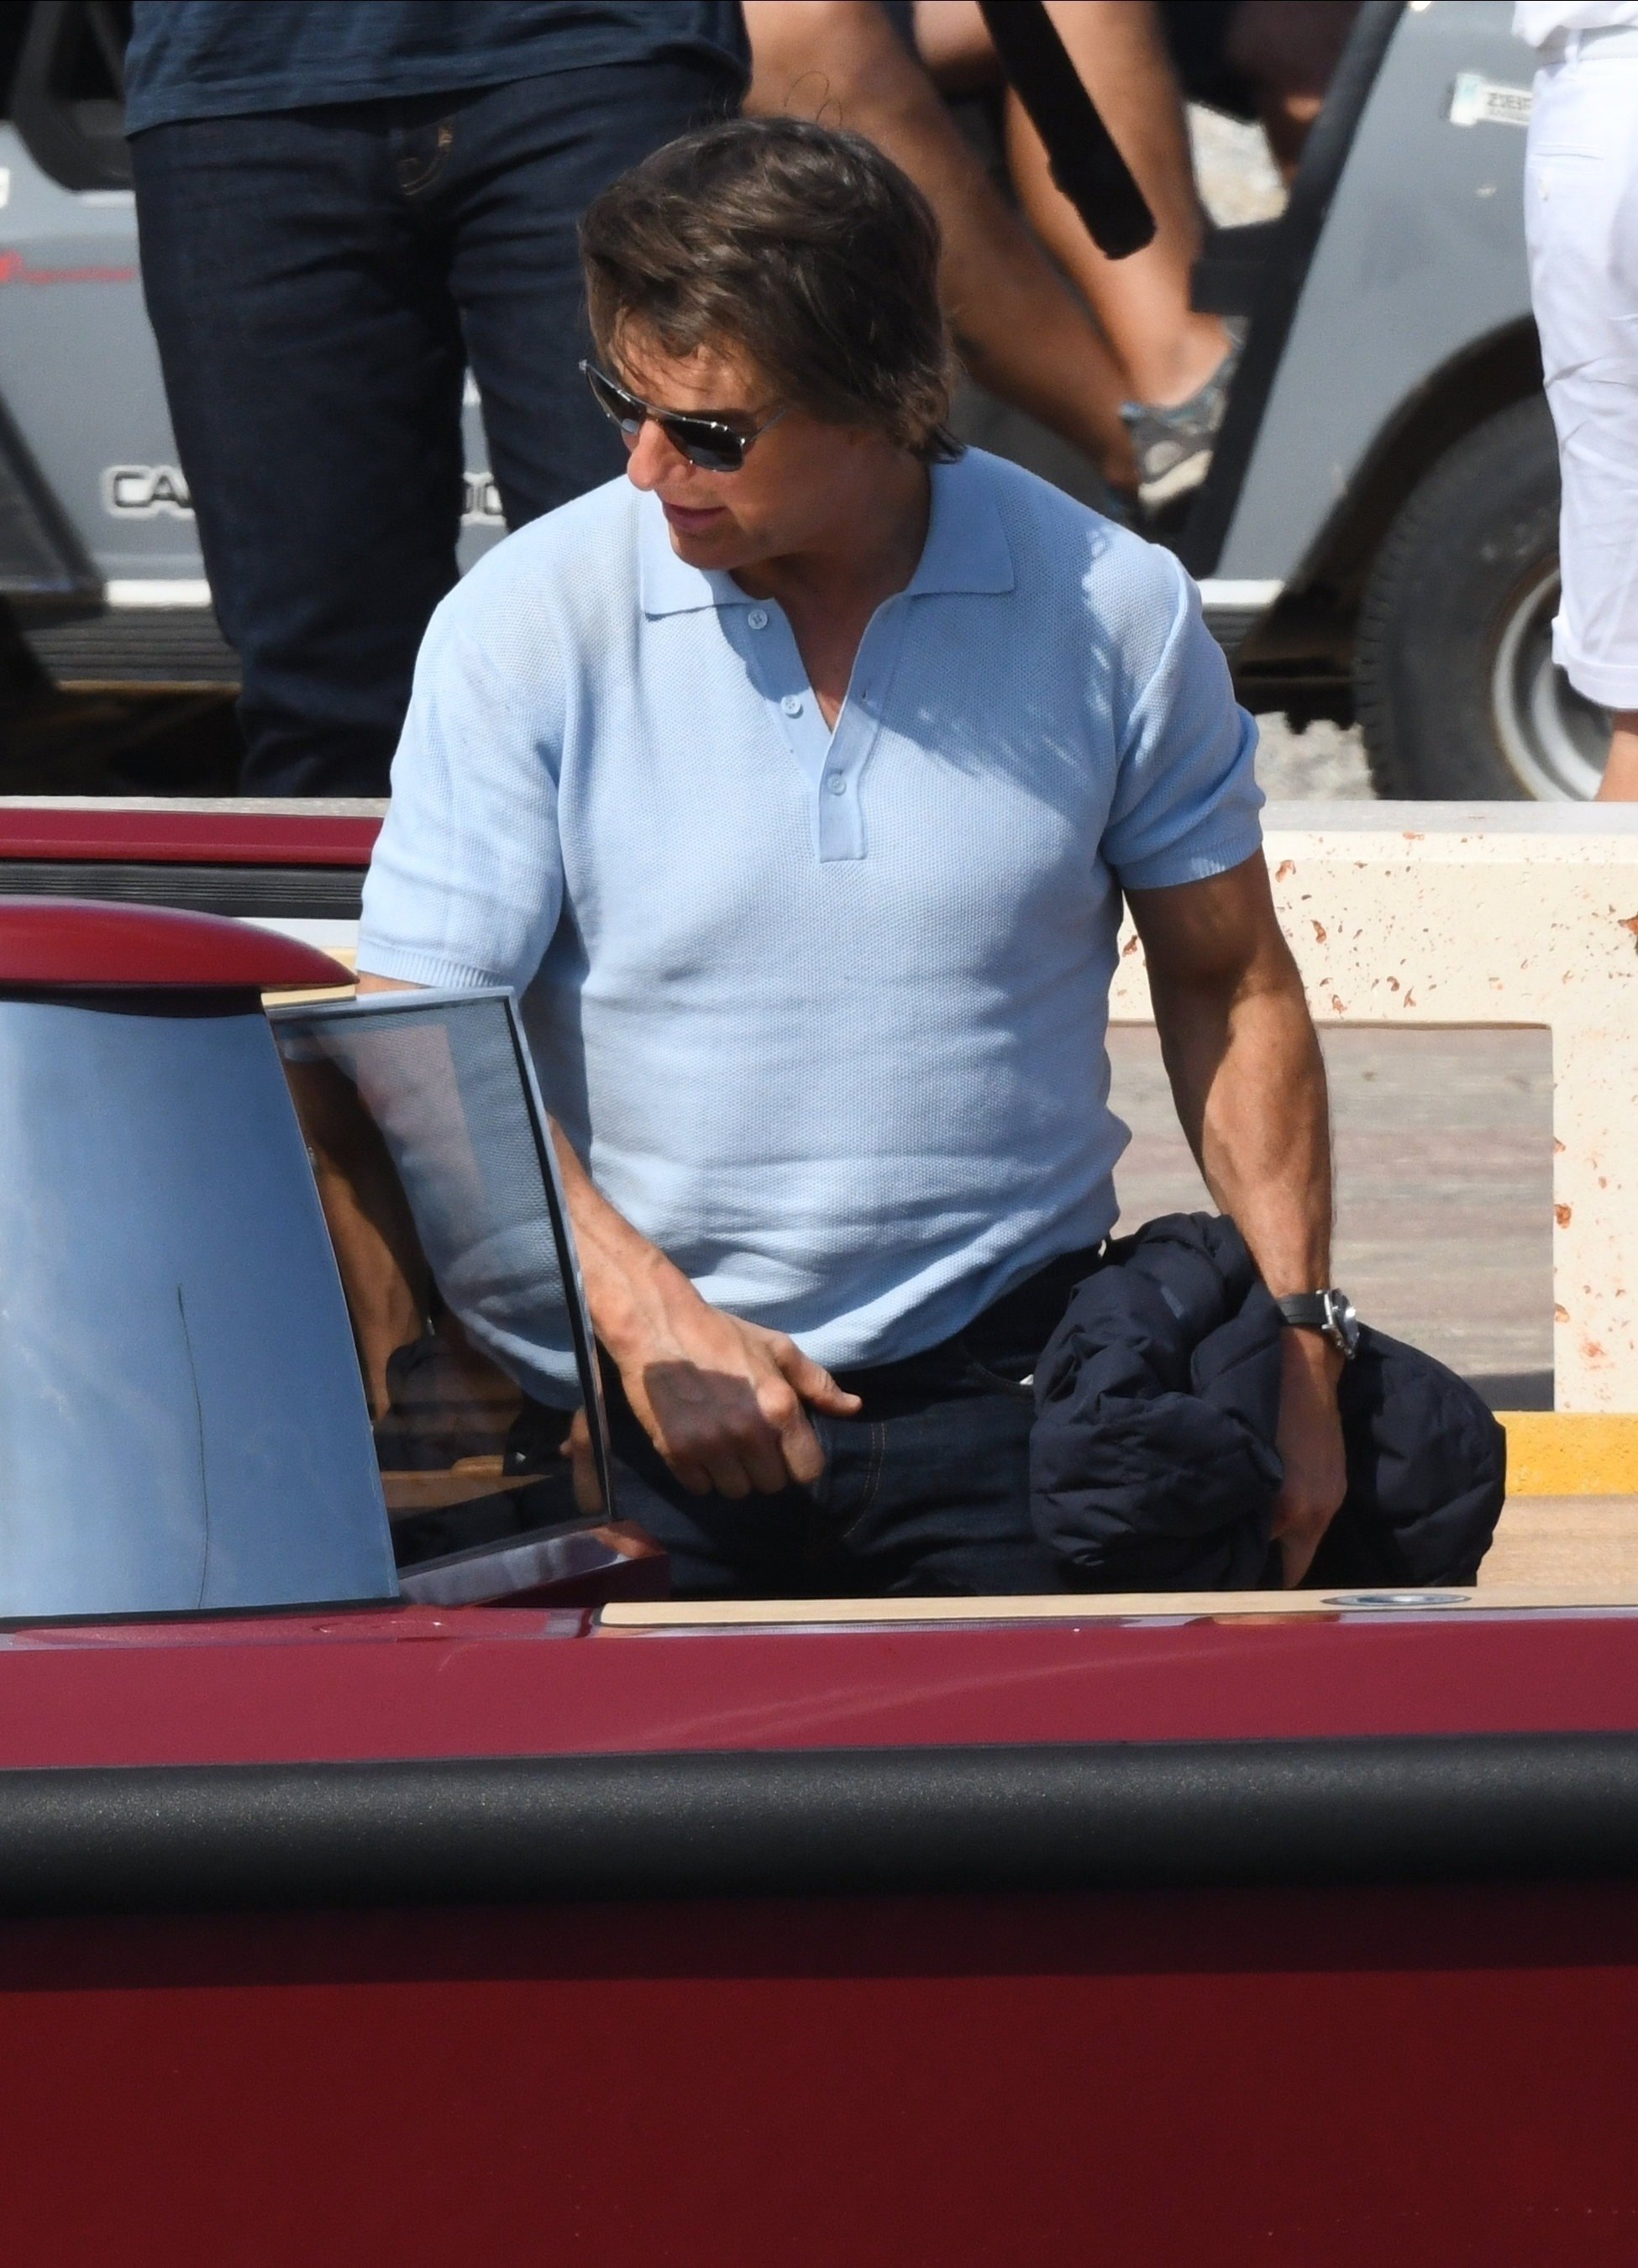 2023-06-24-Candids-of-Tom-at-South-Italy-012.jpg